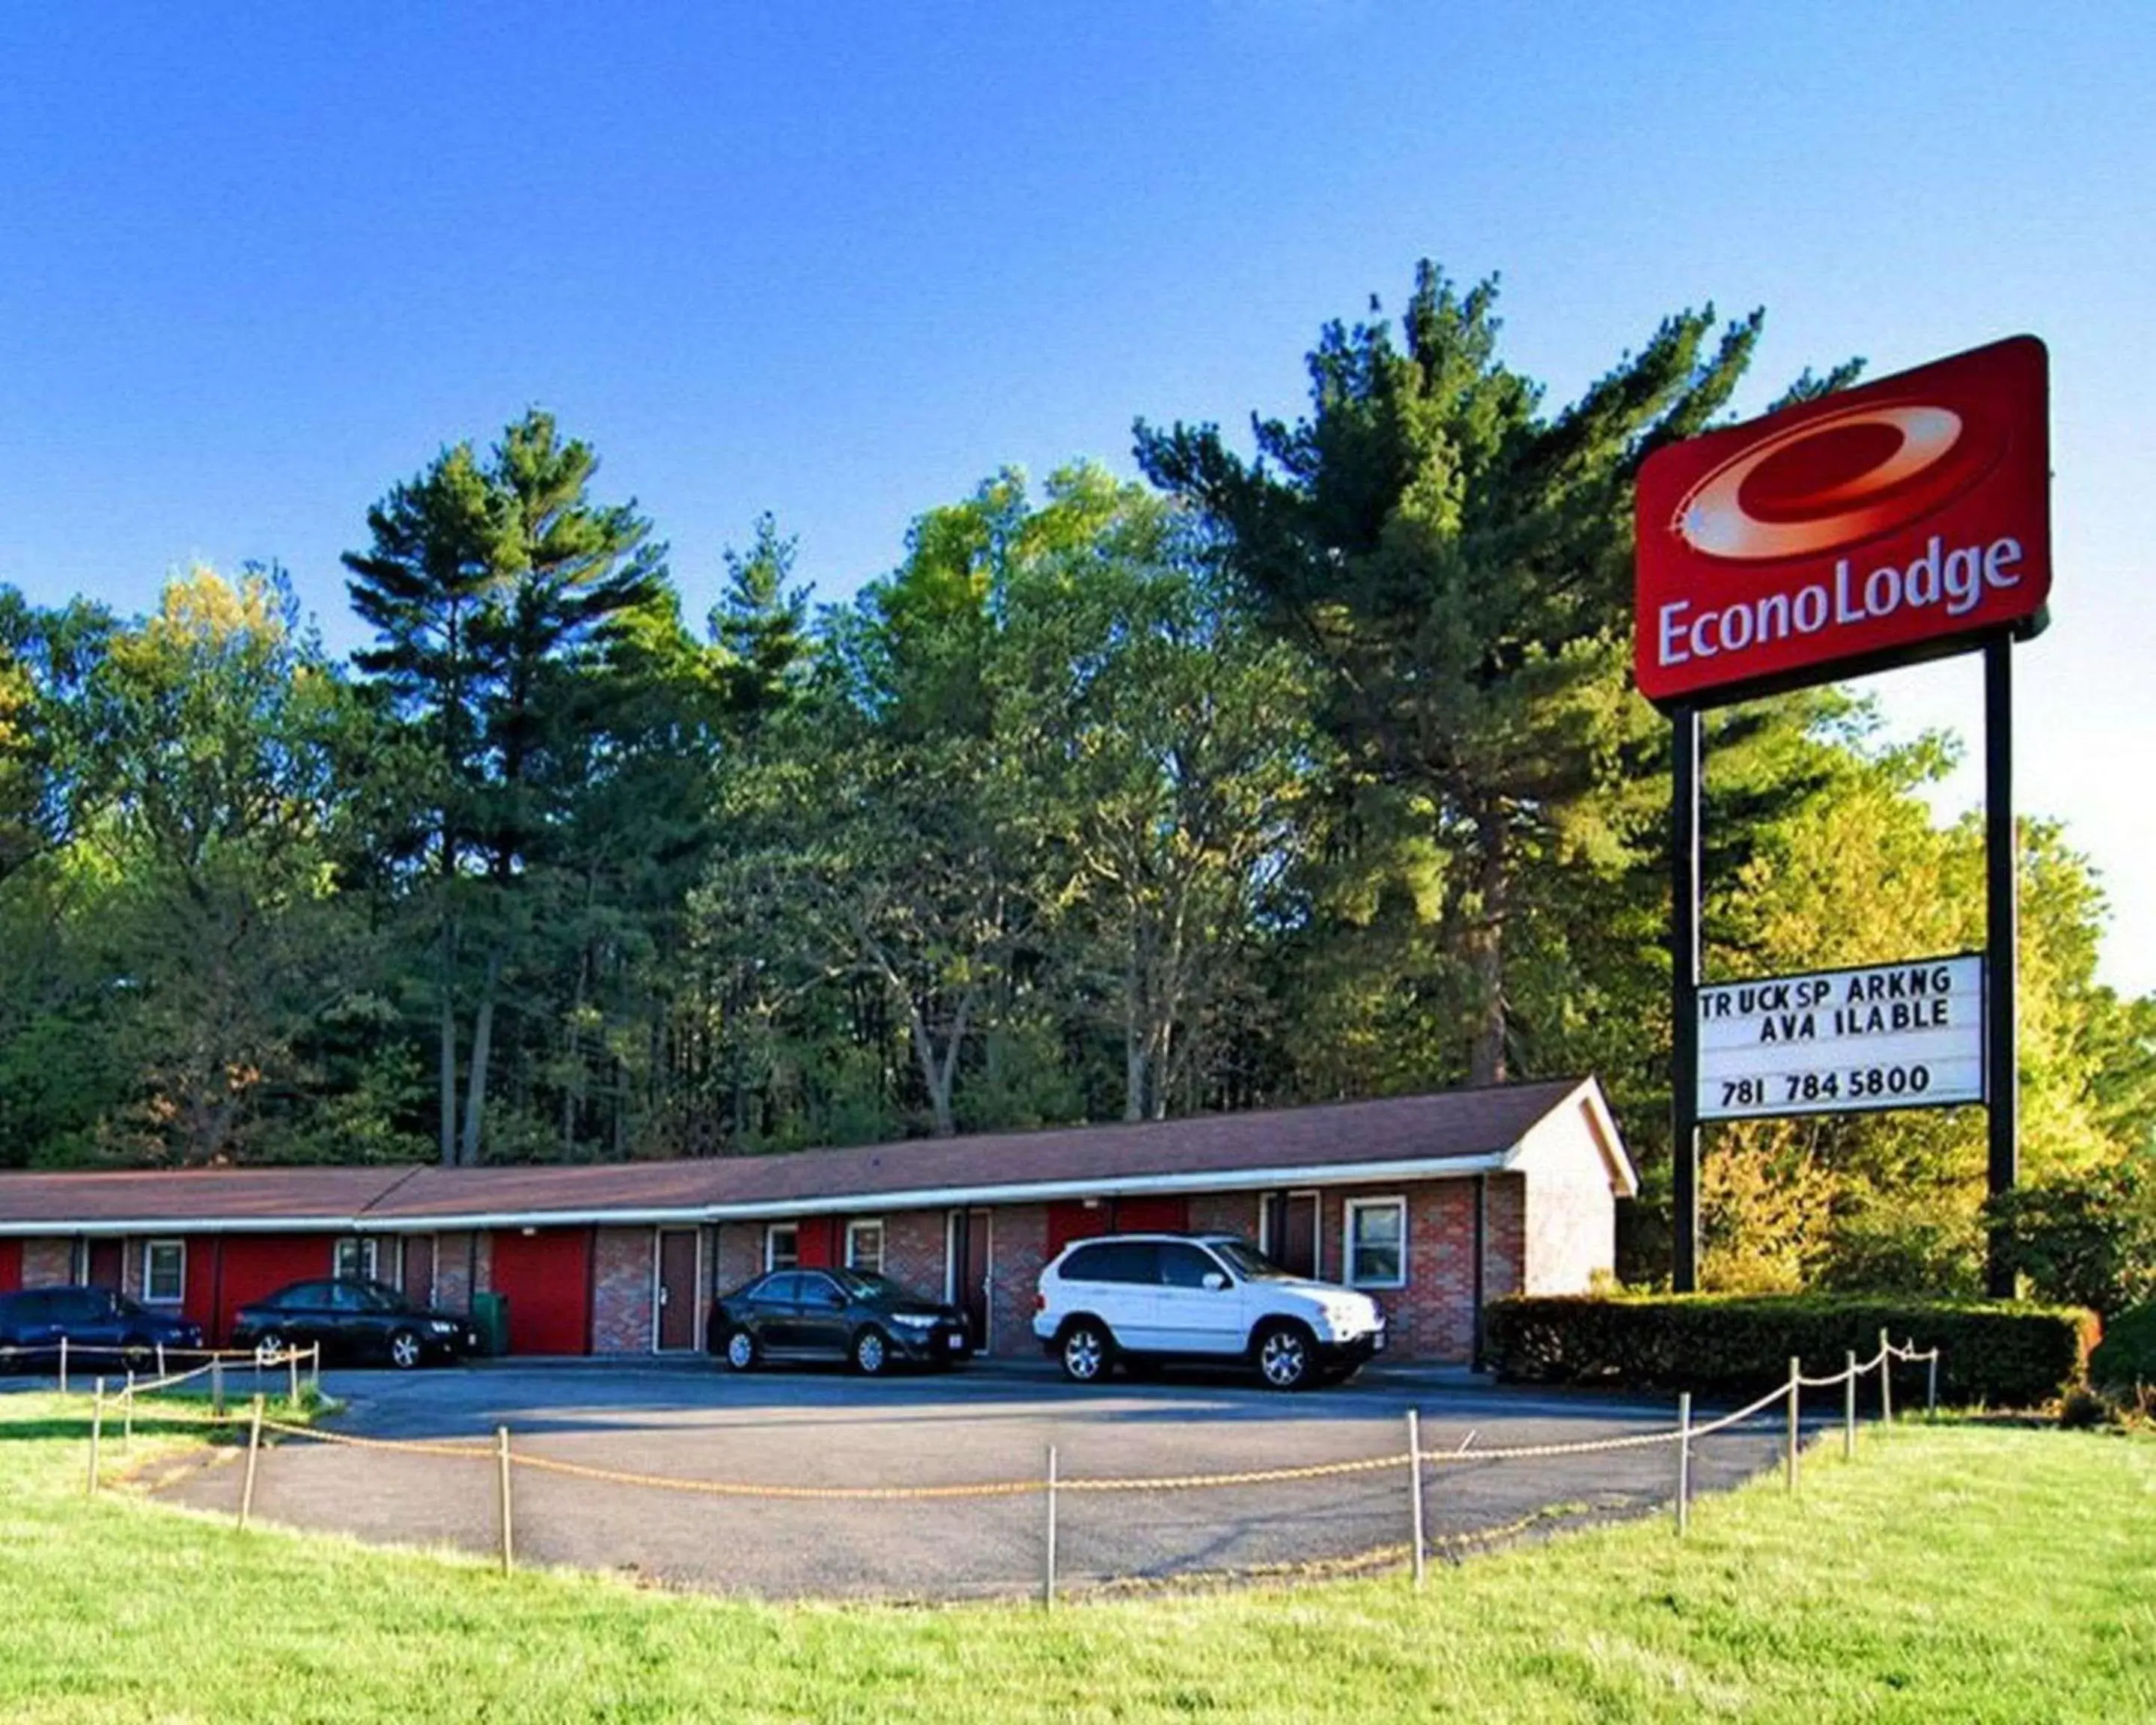 Property building in Econo Lodge Sharon